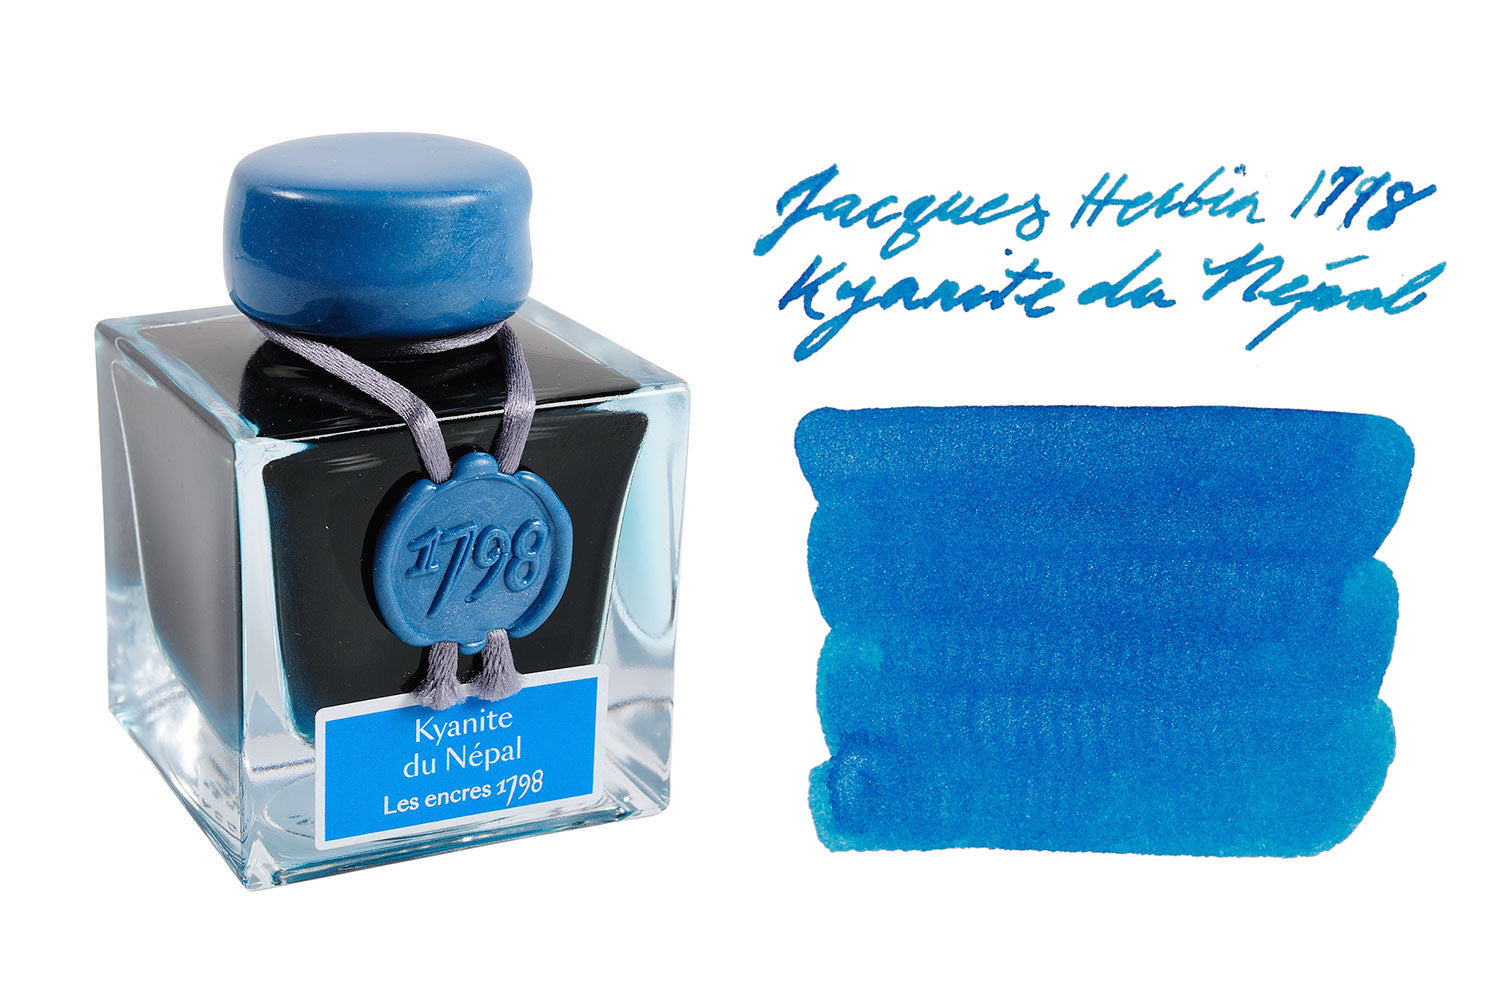 Jacques Herbin 1670 Anniversary and 1798 Special Collection Inks